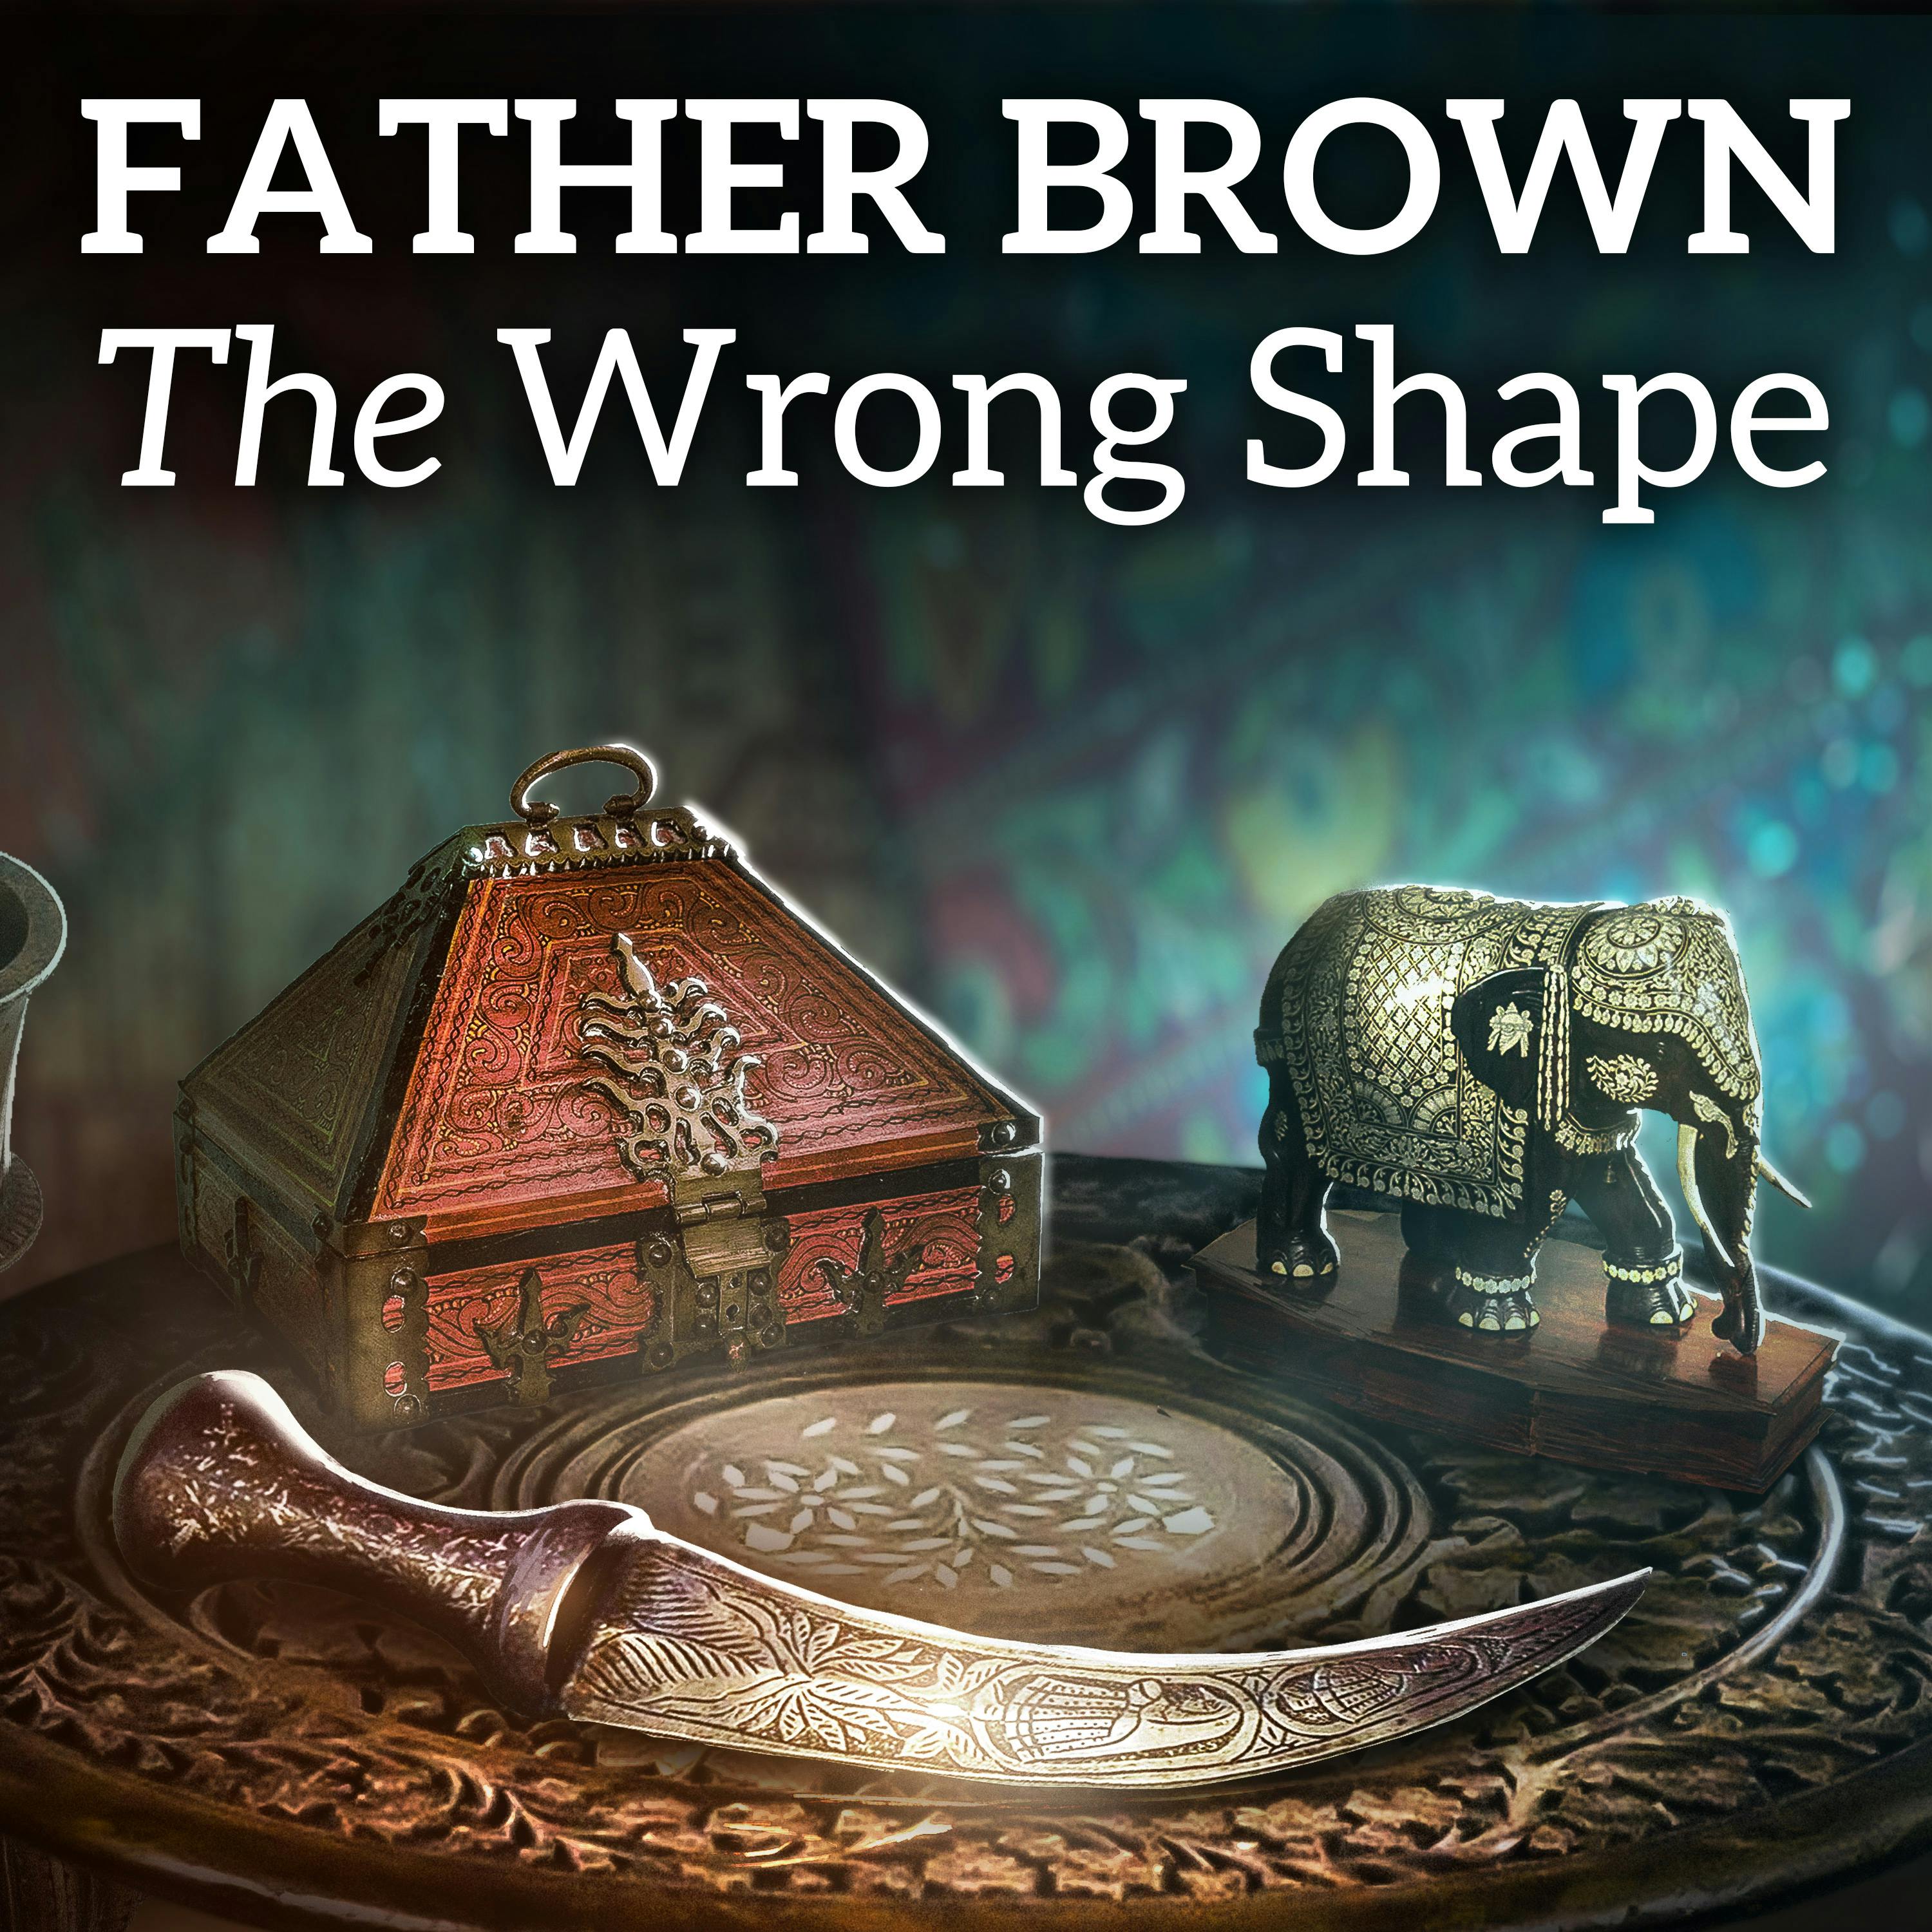 A Murder Mystery - Father Brown and The Wrong Shape